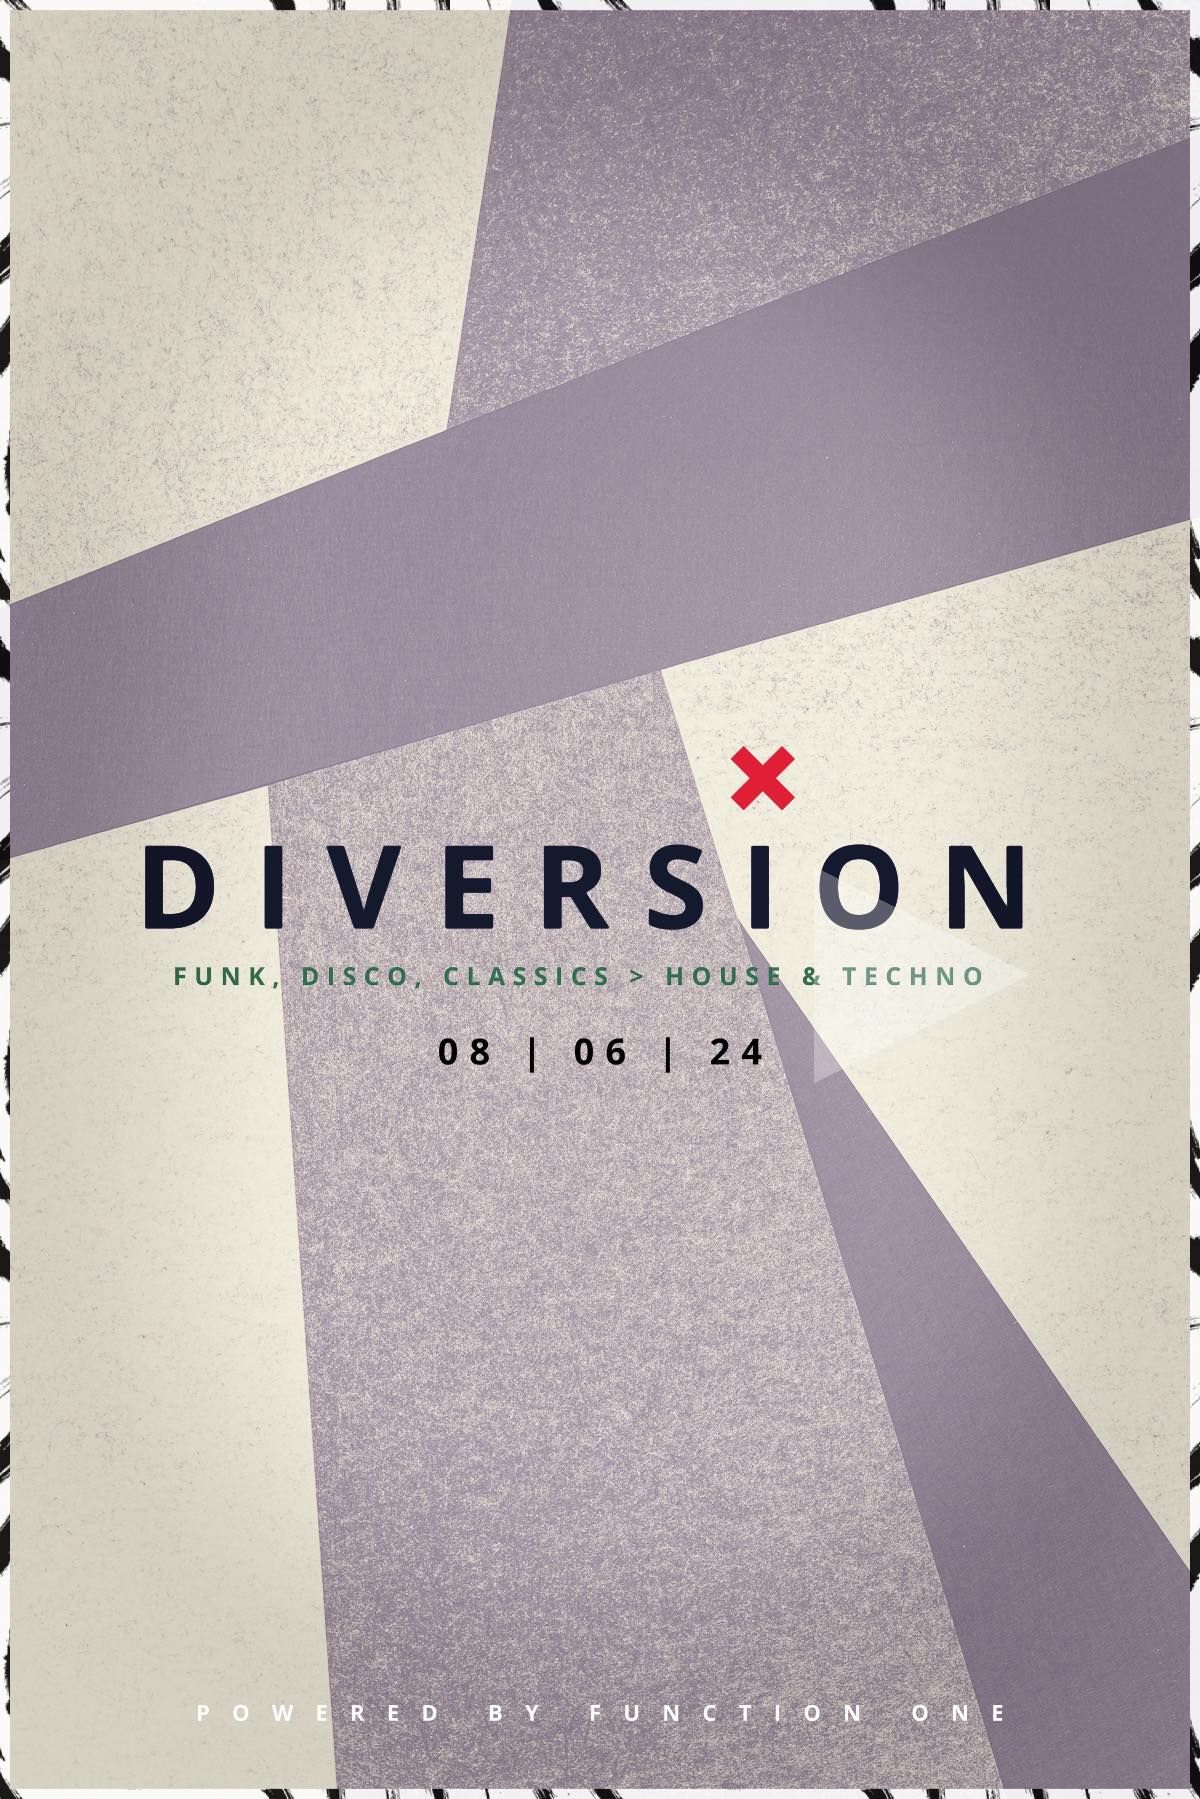 Diversion - Summer Soiree with Josh Gregg + Residents